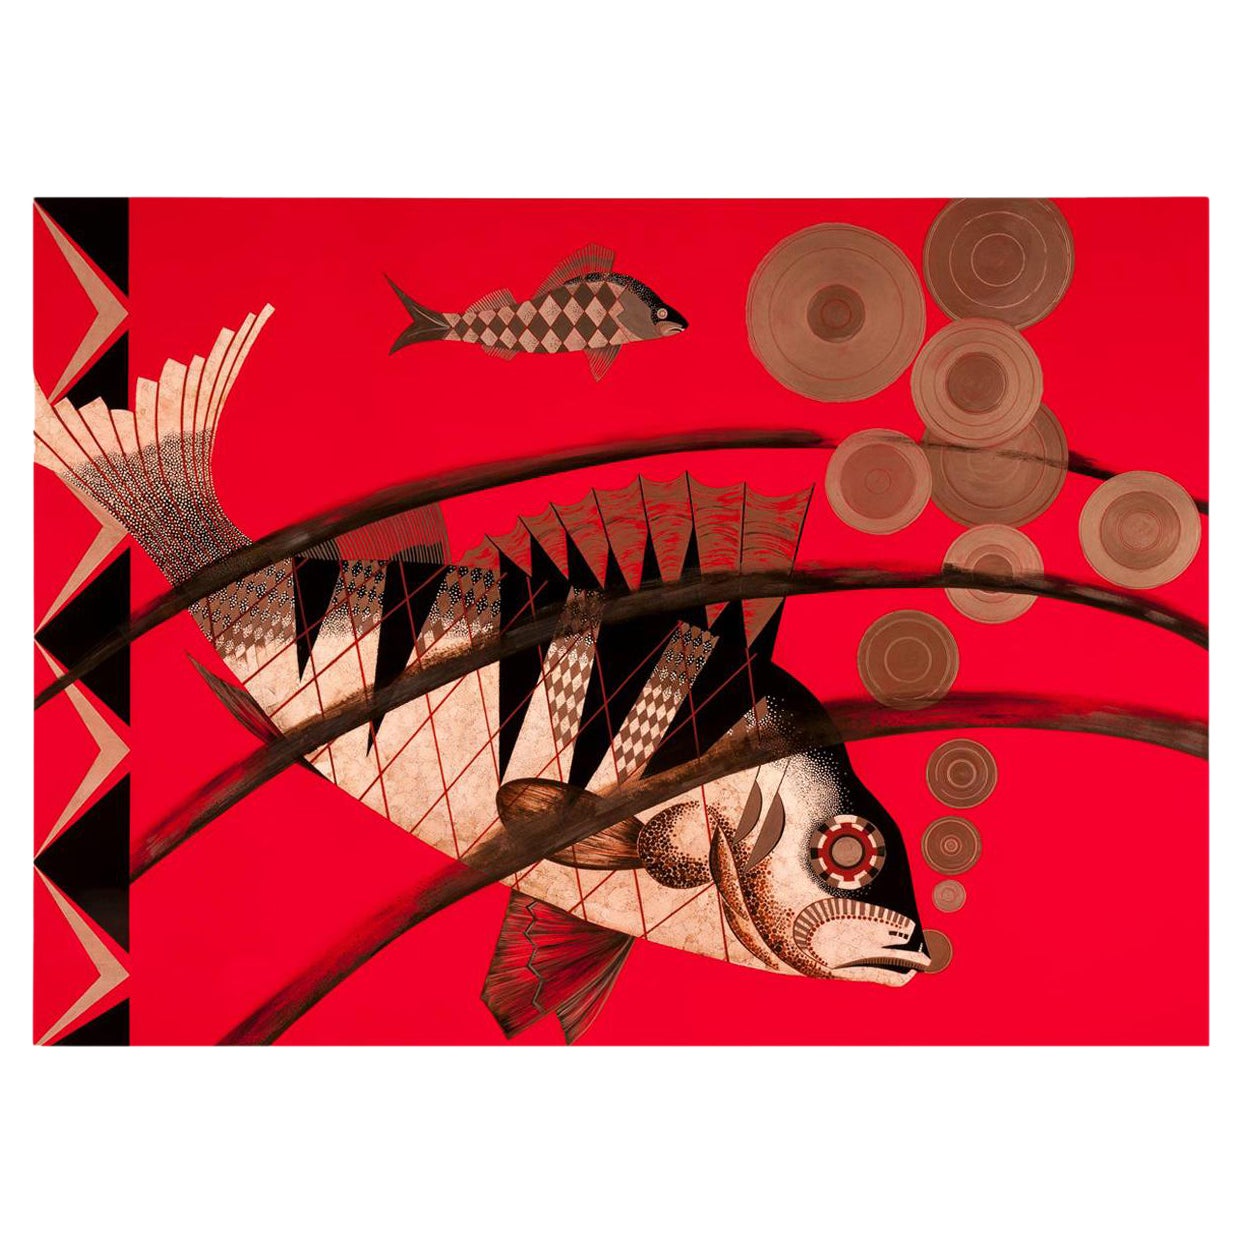 Pollaro Eggshell Inlay and Lacquer Fish Art Inspired by Jean Dunand